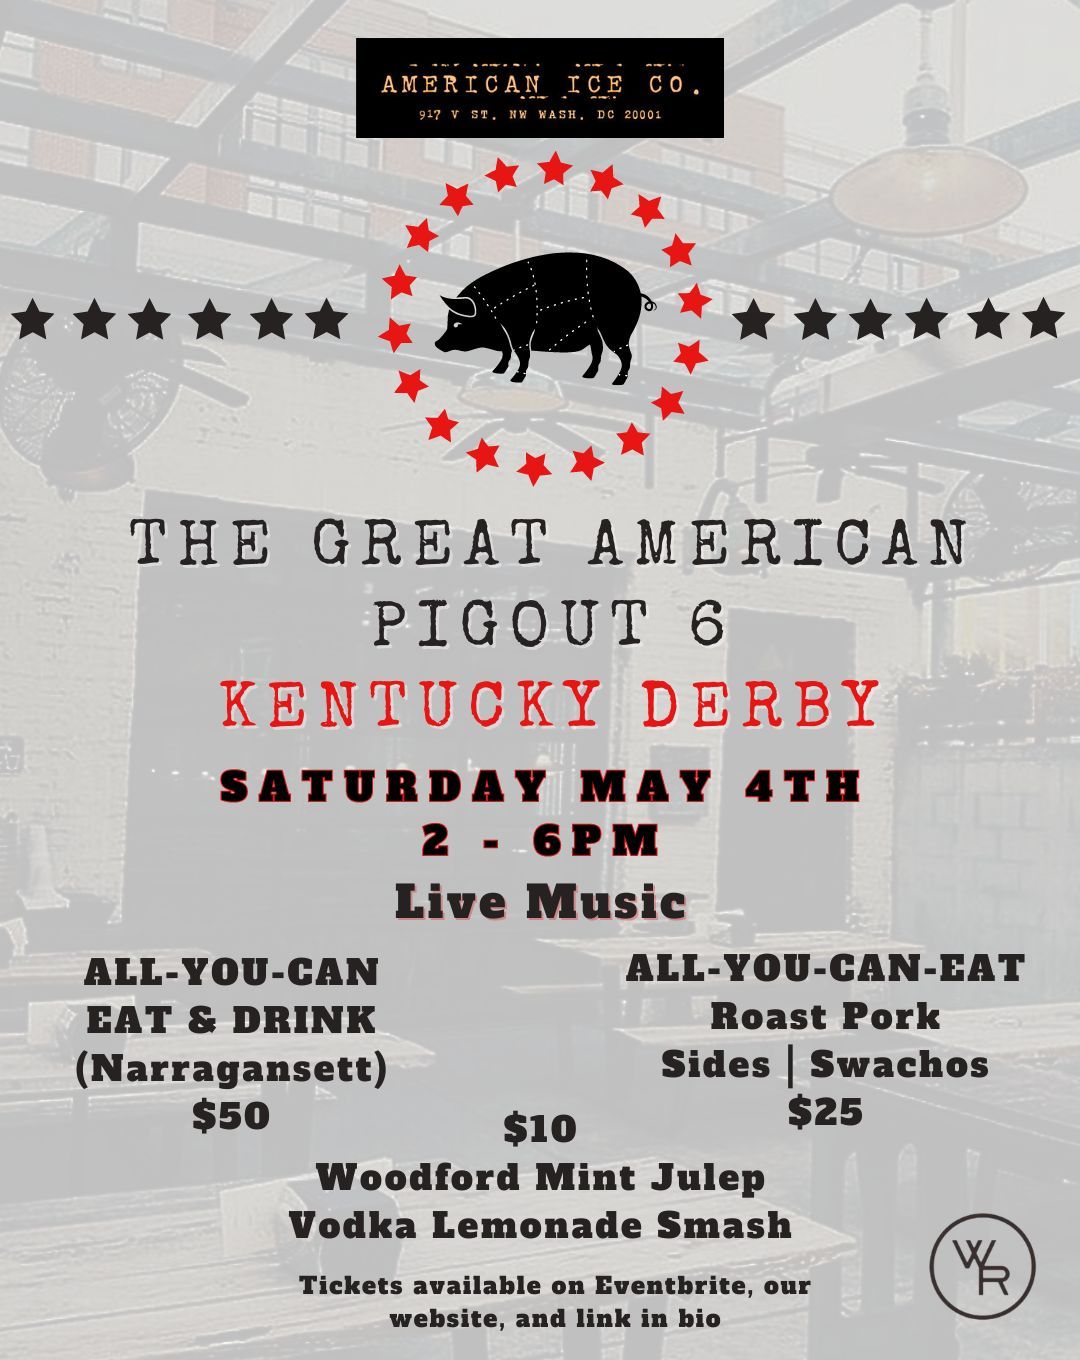 Derby Day Pig Roast at American Ice Co. 